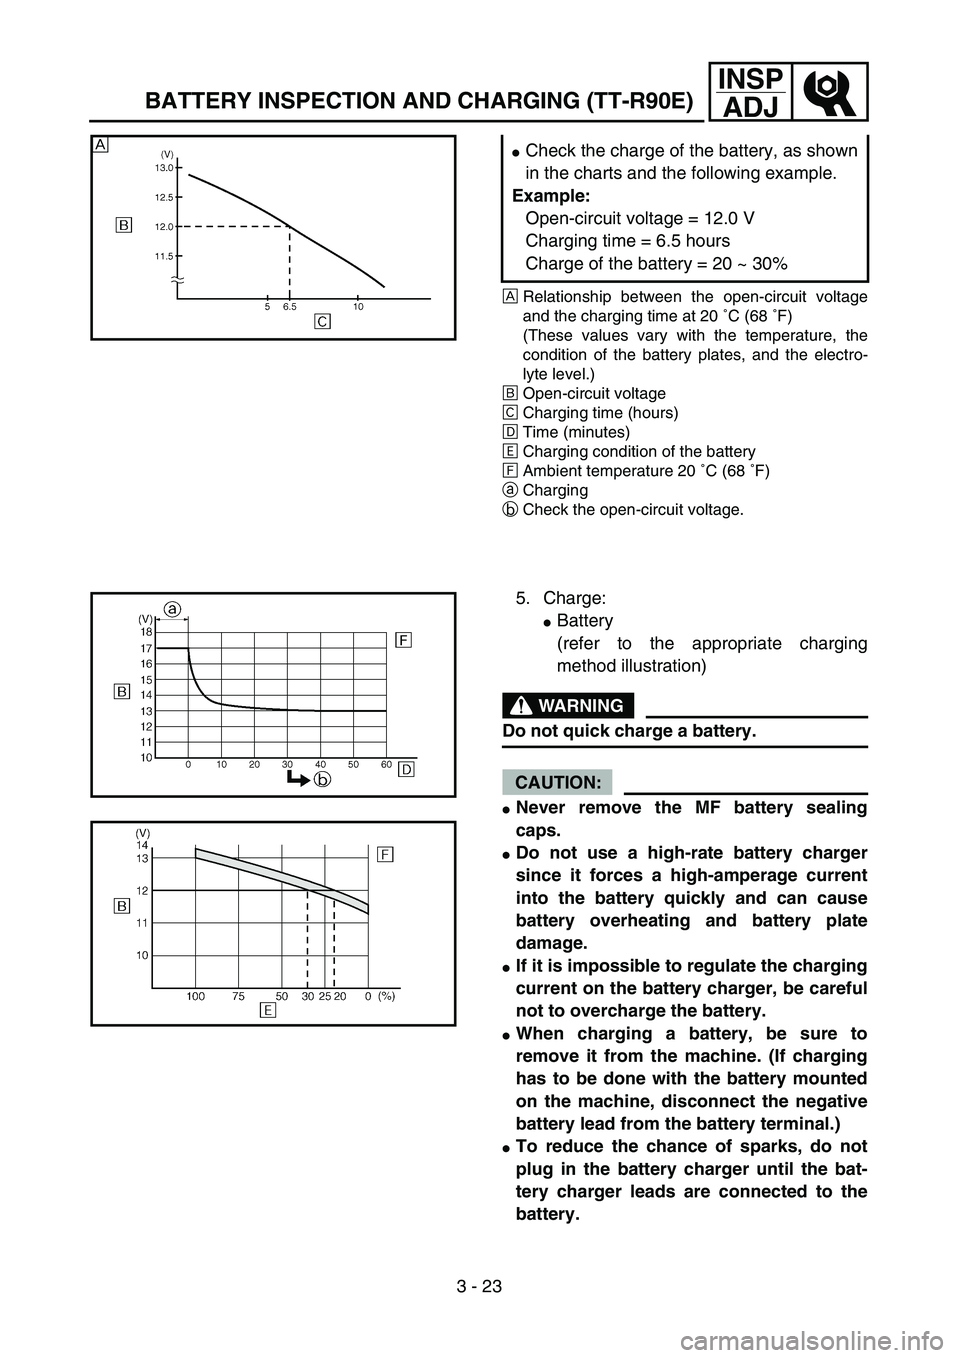 YAMAHA TTR90 2004  Owners Manual 3 - 23
INSP
ADJ
BATTERY INSPECTION AND CHARGING (TT-R90E)
ÅRelationship between the open-circuit voltage
and the charging time at 20 ˚C (68 ˚F) 
(These values vary with the temperature, the
conditi